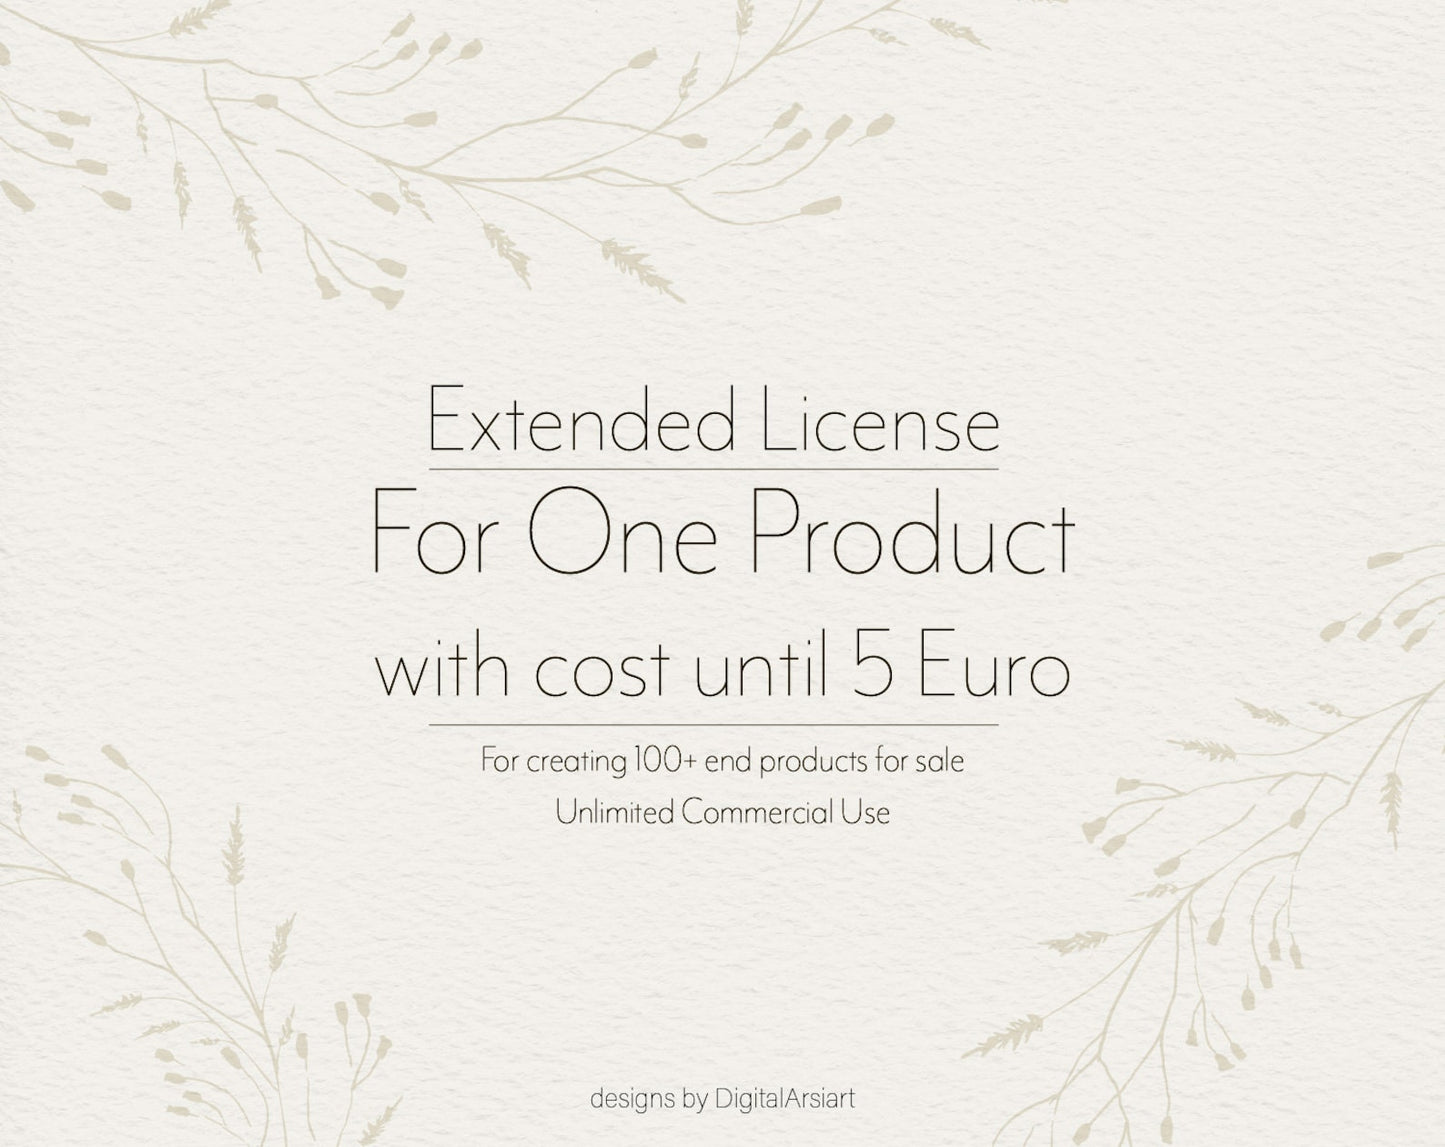 DIgitalArsiart - Extended License - product cost until 5 Euro.